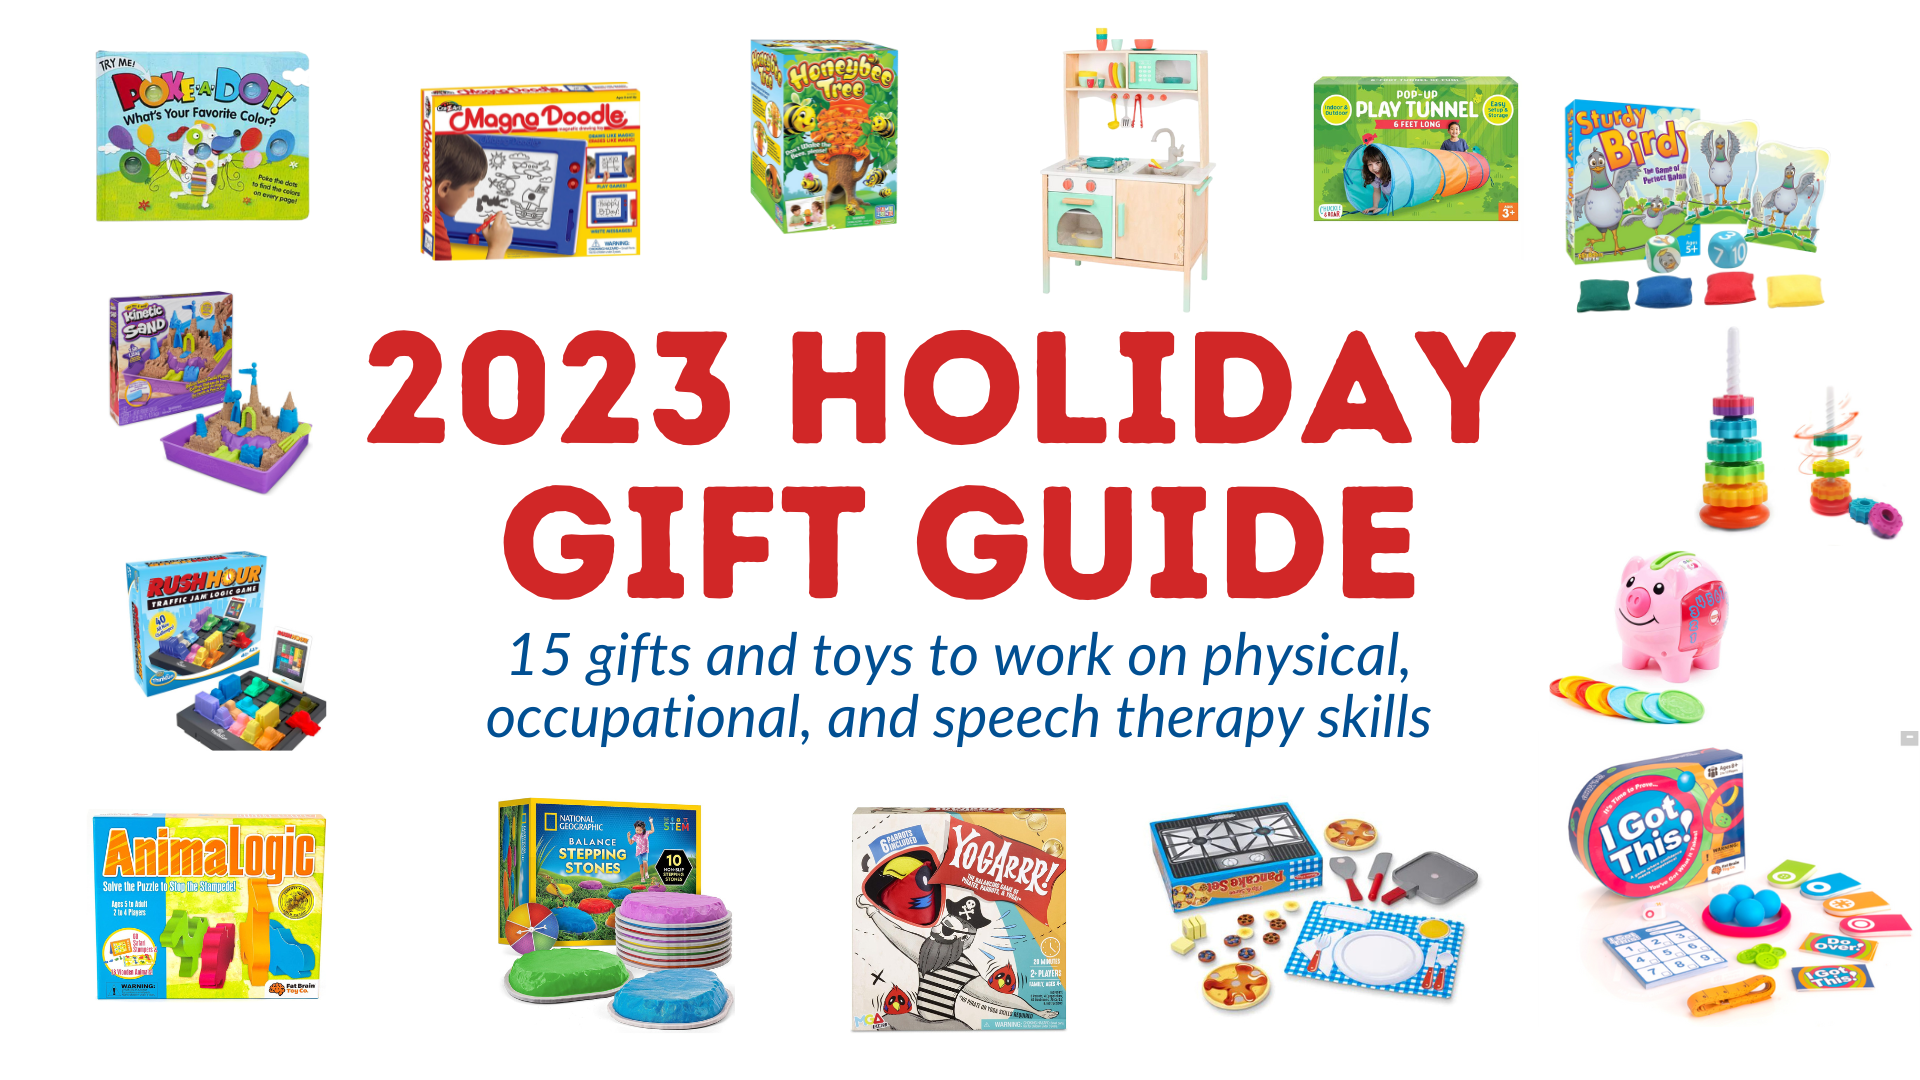 People of Play - POP Holiday Gift Guide and.